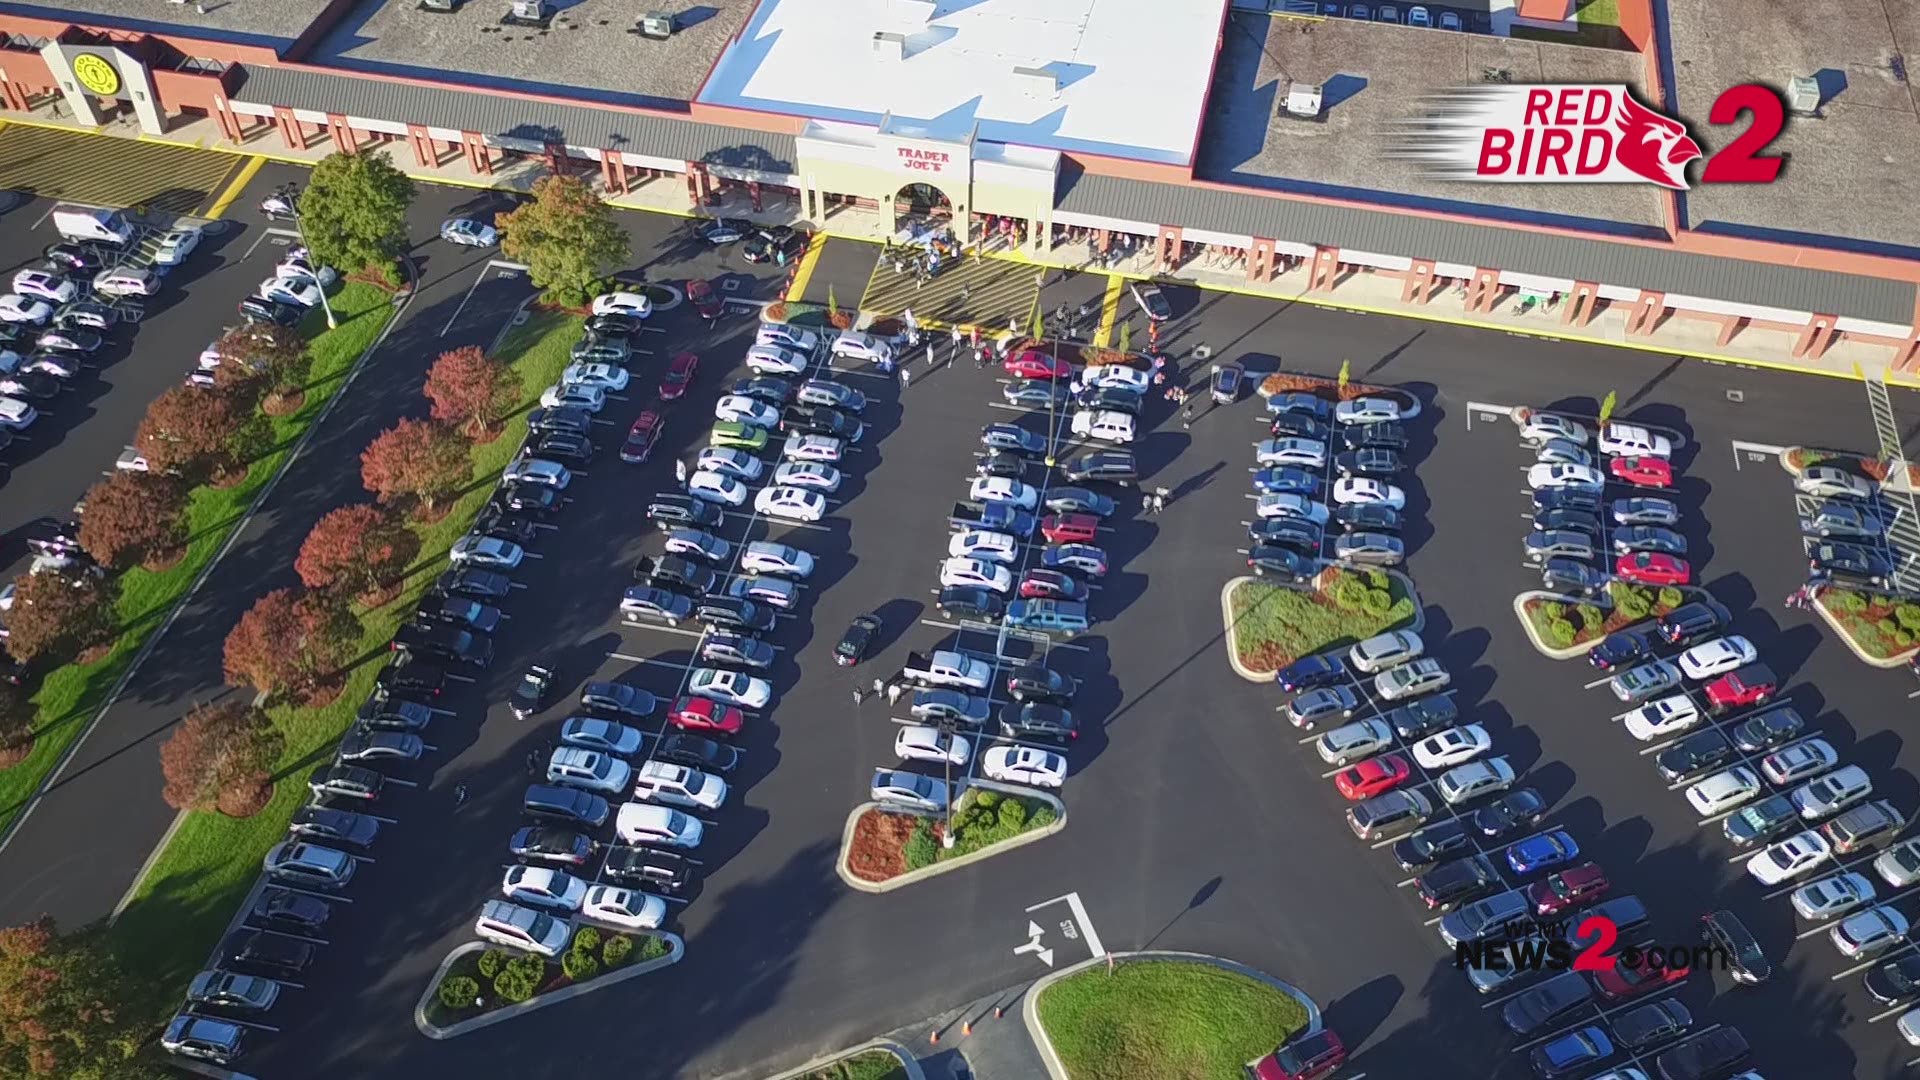 Our drone Red Bird 2 flew over the new grocery store in the Brassfield Shopping Center. It's a packed lot!